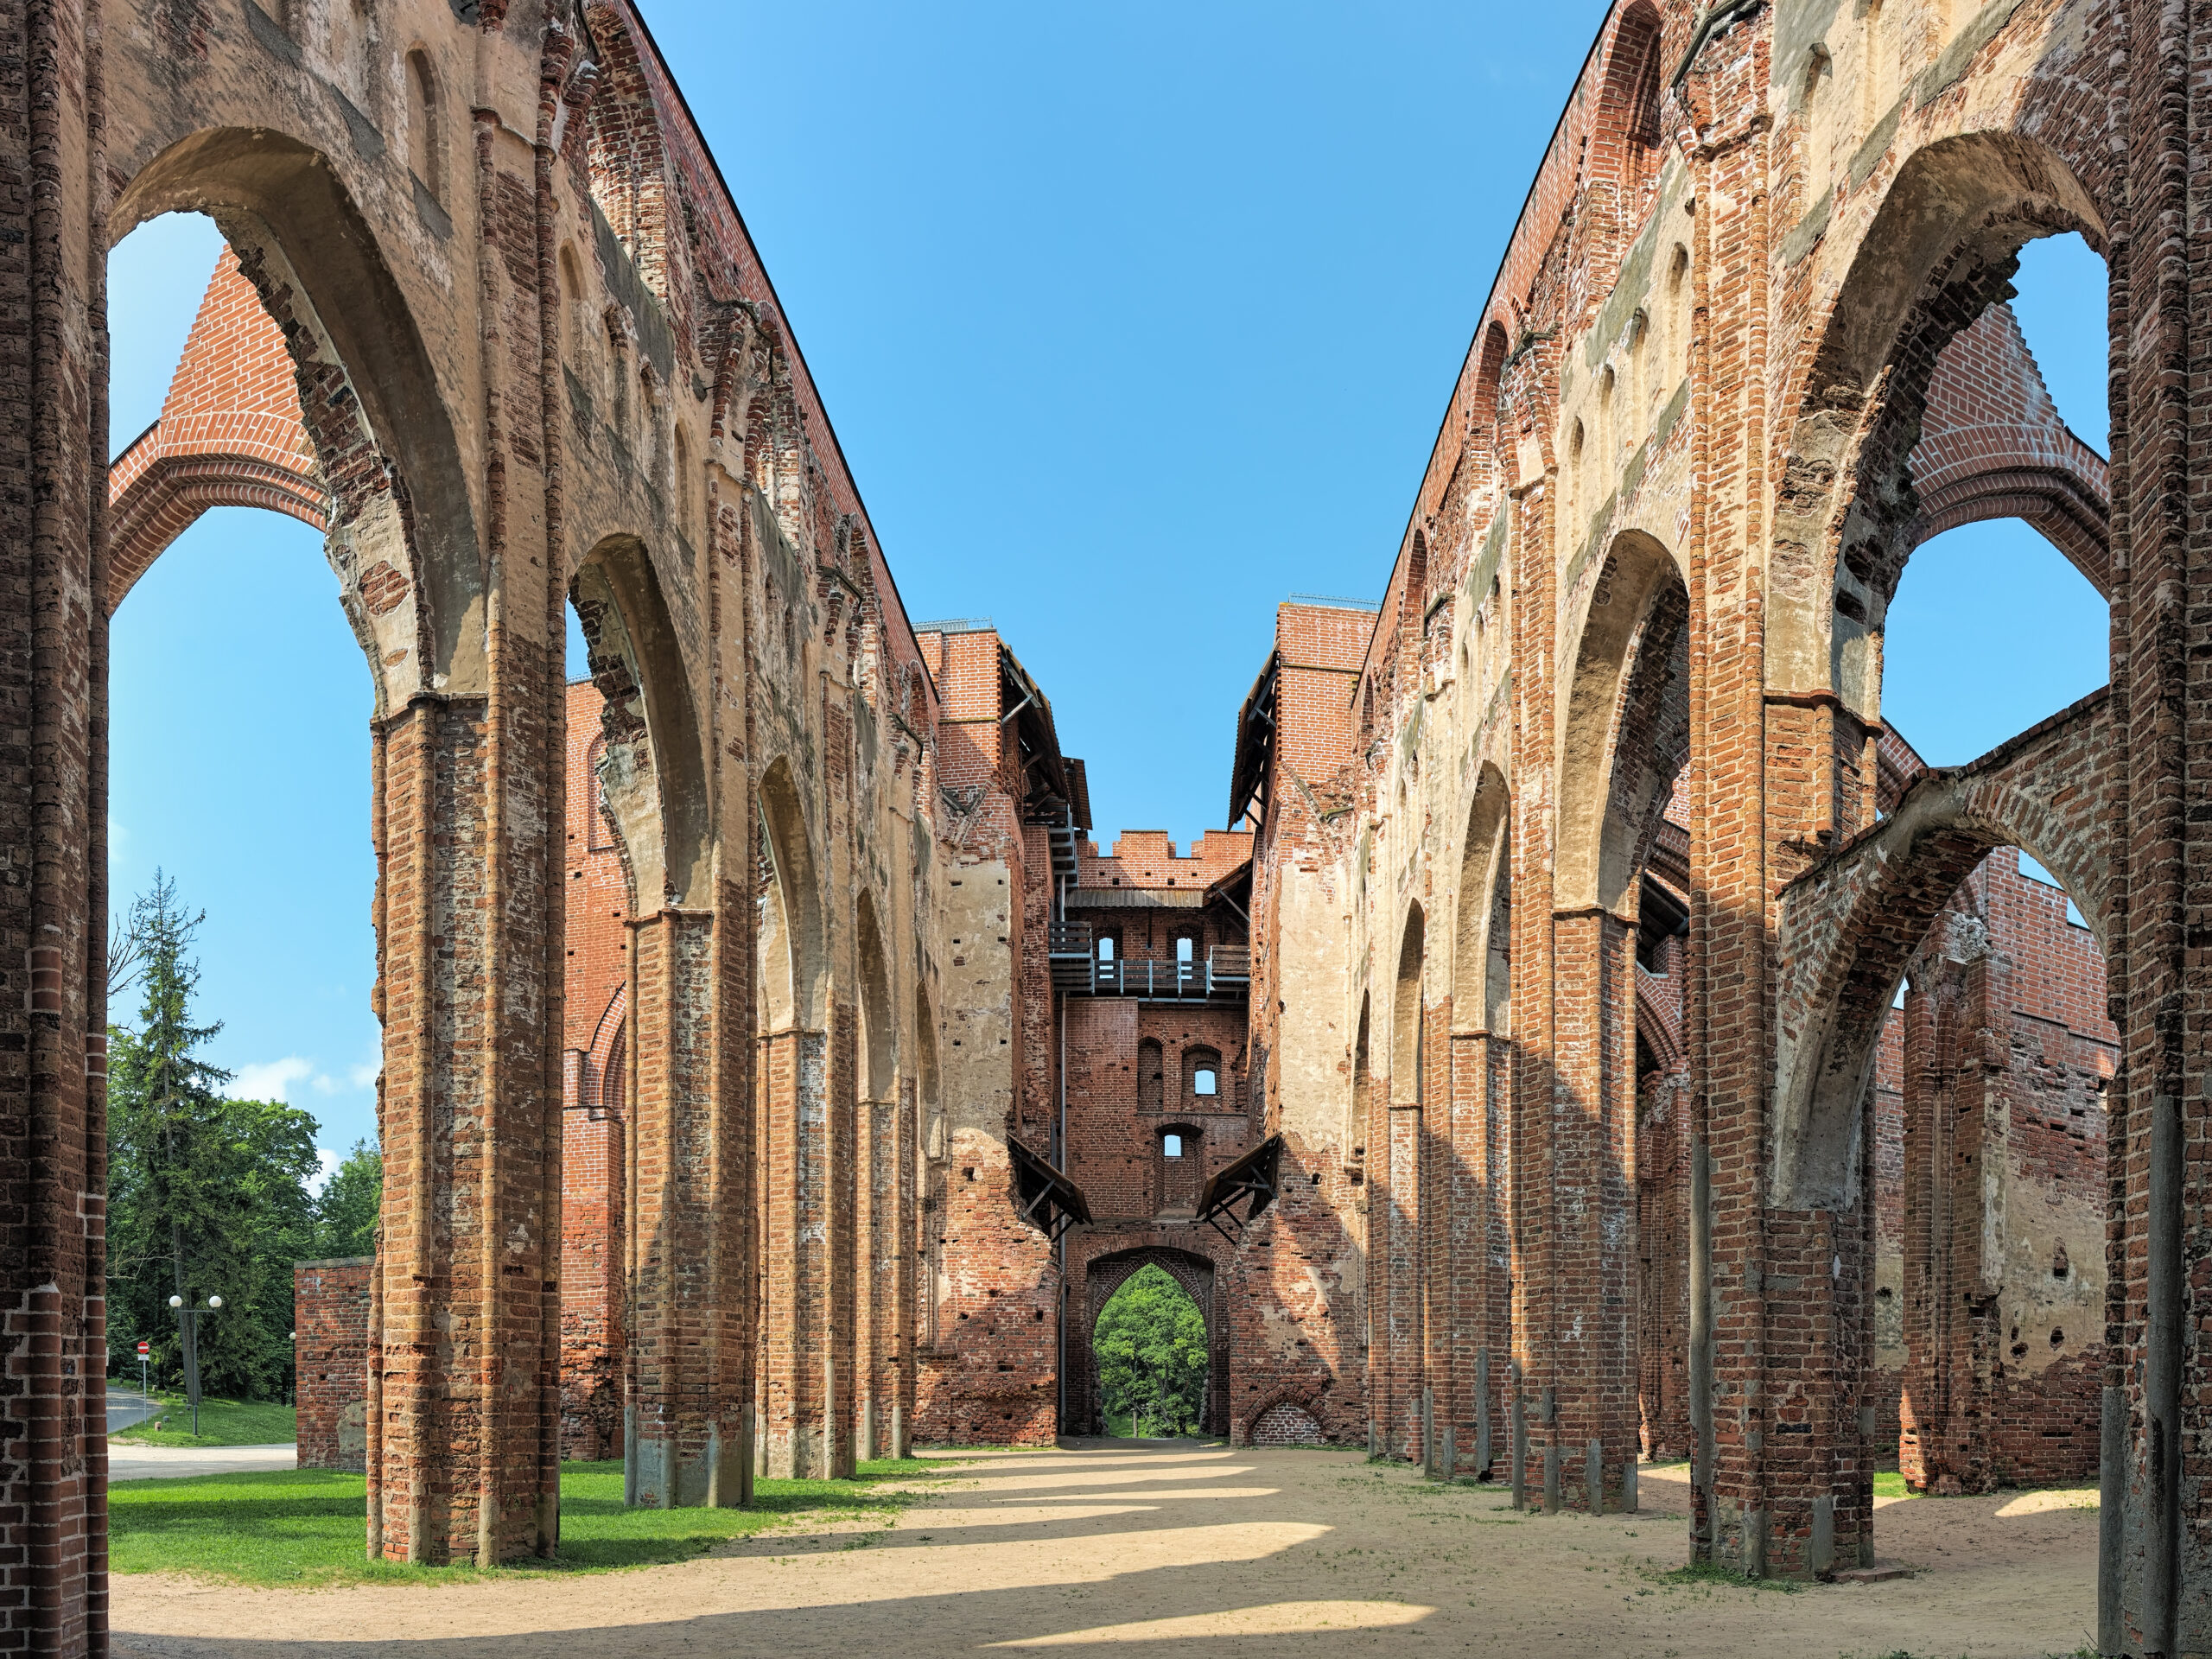 Ruins of Cathedral in Estonia. The cathedral was built from the 13th to 15th century and was abandoned and began to fall apart from the second half of the 16th century.